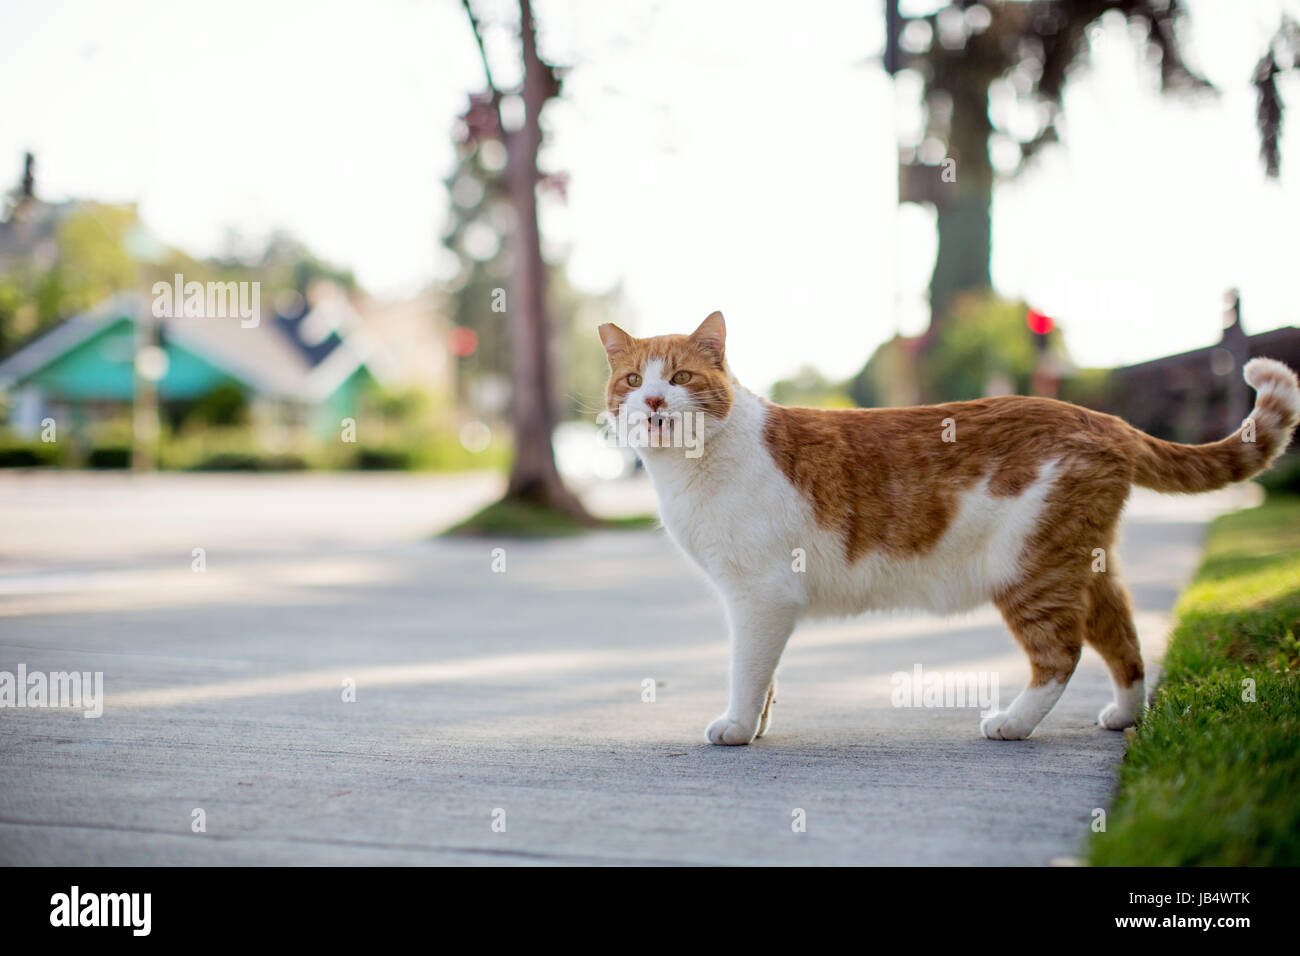 Orange and white tabby cat standing on a sidewalk in a residential setting with mouth open and meowing, Stock Photo